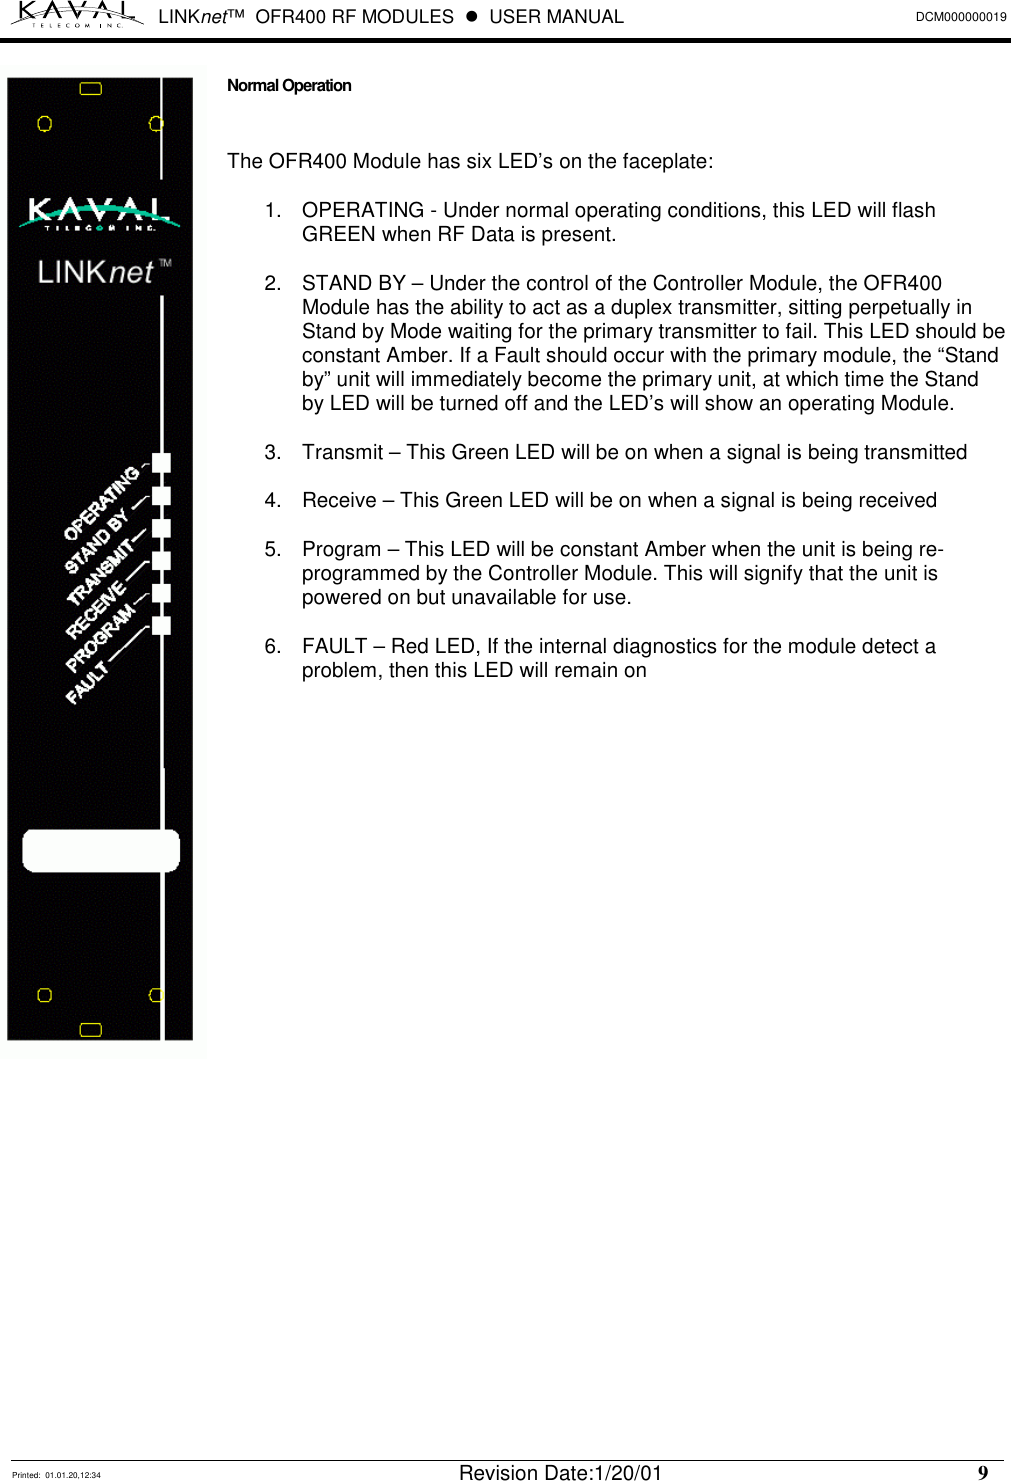 LINKnet™  OFR400 RF MODULES  !  USER MANUAL DCM000000019   Printed:  01.01.20,12:34  Revision Date:1/20/01    9   Normal Operation  The OFR400 Module has six LED’s on the faceplate: 1.  OPERATING - Under normal operating conditions, this LED will flash GREEN when RF Data is present. 2.  STAND BY – Under the control of the Controller Module, the OFR400 Module has the ability to act as a duplex transmitter, sitting perpetually in Stand by Mode waiting for the primary transmitter to fail. This LED should be constant Amber. If a Fault should occur with the primary module, the “Stand by” unit will immediately become the primary unit, at which time the Stand by LED will be turned off and the LED’s will show an operating Module. 3.  Transmit – This Green LED will be on when a signal is being transmitted 4.  Receive – This Green LED will be on when a signal is being received 5.  Program – This LED will be constant Amber when the unit is being re-programmed by the Controller Module. This will signify that the unit is powered on but unavailable for use. 6.  FAULT – Red LED, If the internal diagnostics for the module detect a problem, then this LED will remain on               